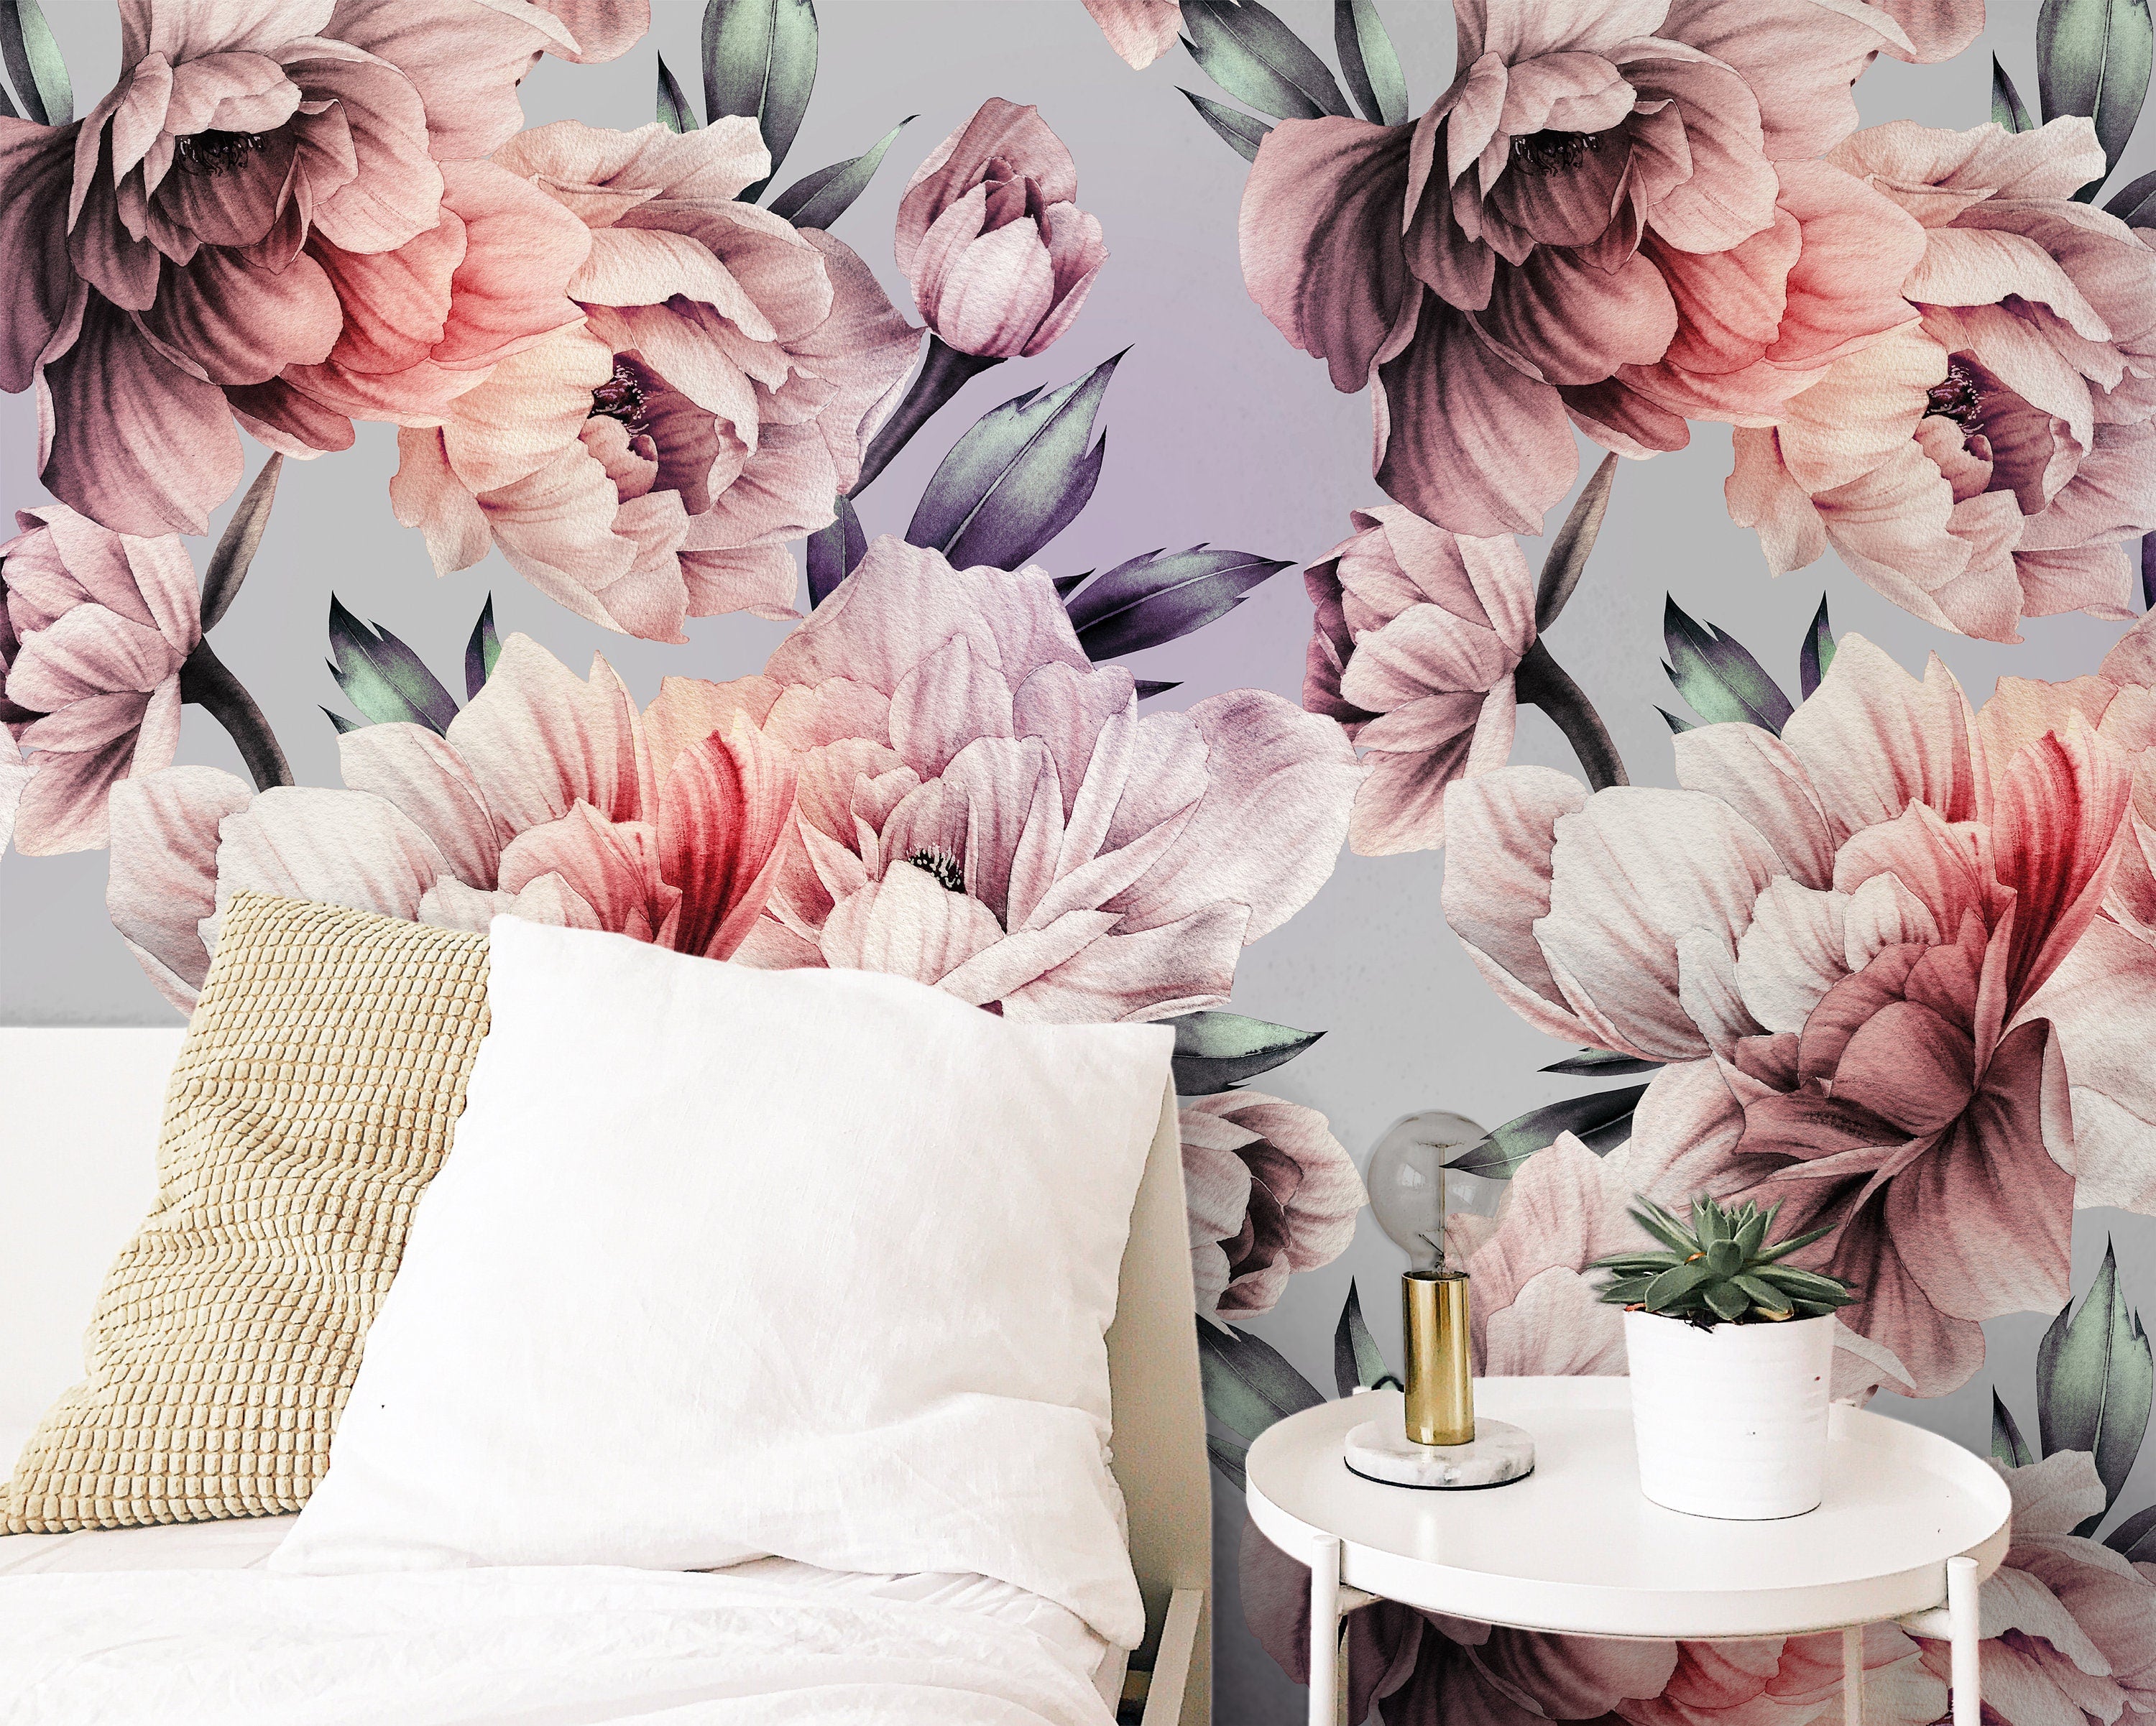 Large Floral Mural Wallpaper | Removable Wallpaper | Peel And Stick Wallpaper | Adhesive Wallpaper | Wall Paper Peel Stick Wall Mural 3669 - JamesAndColors